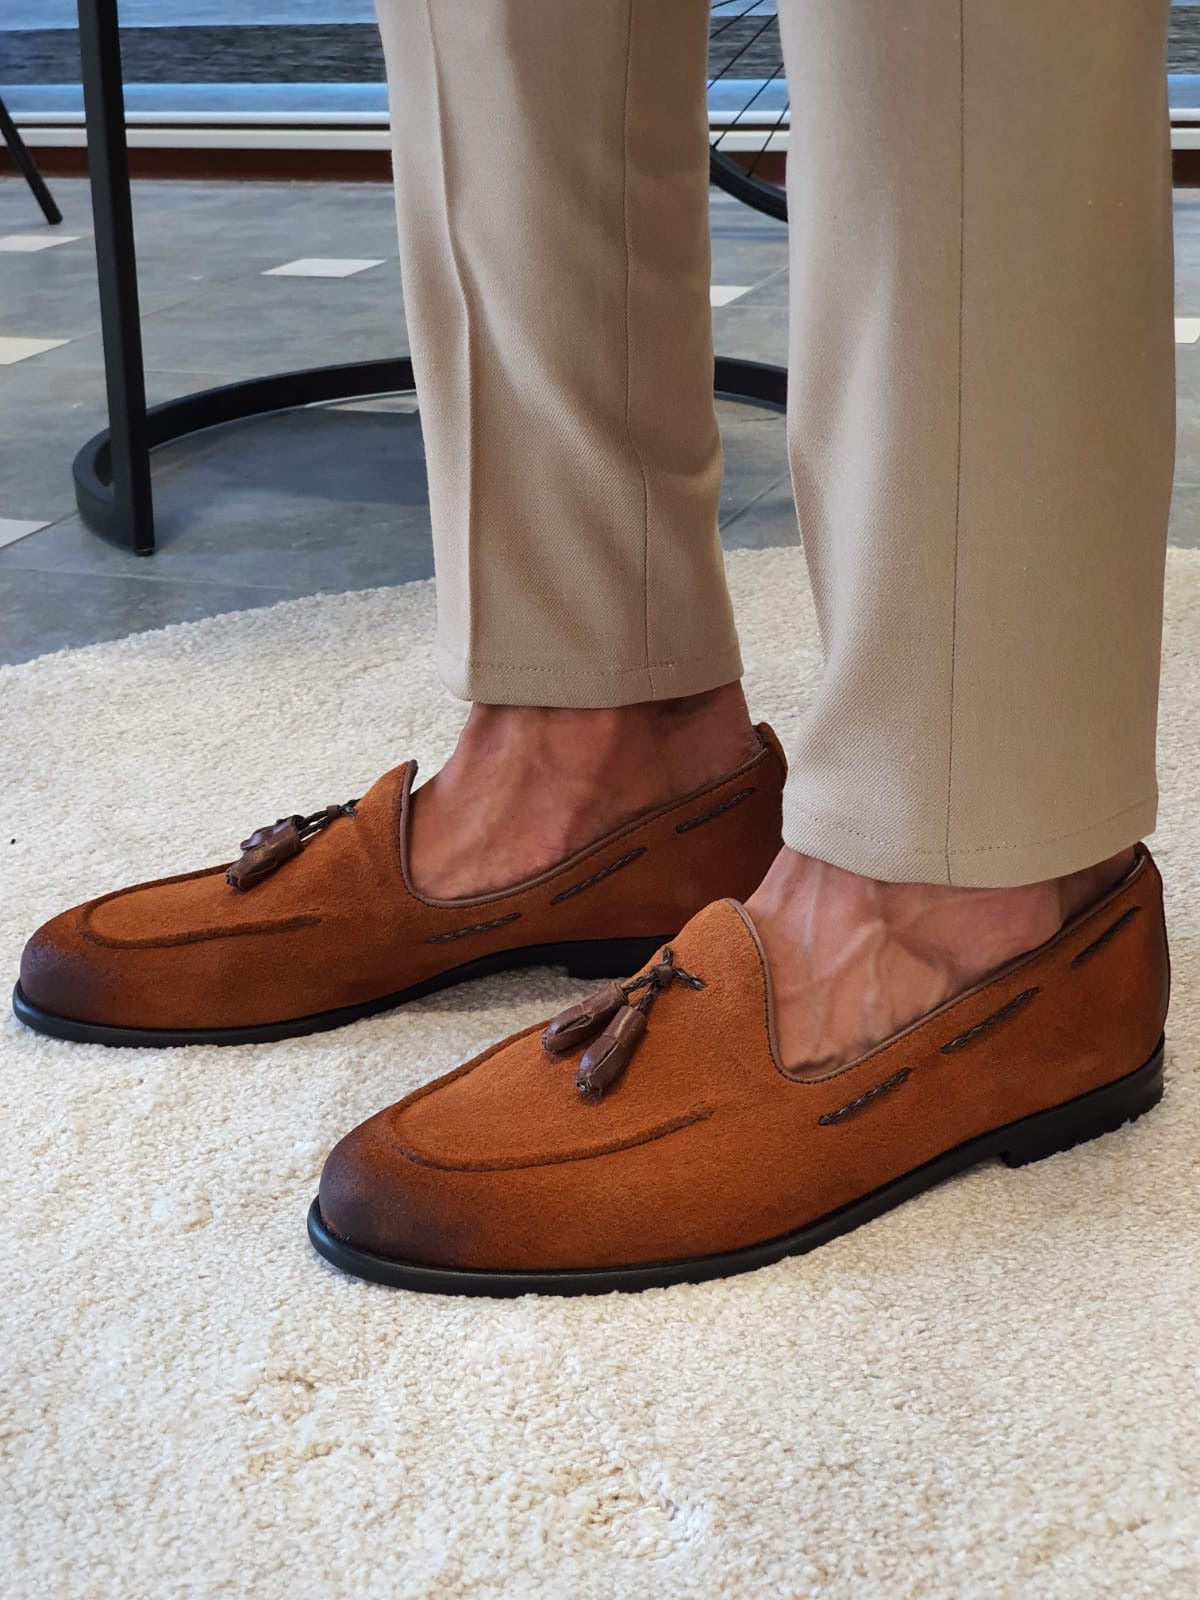 TAN SUEDE SPECIAL EDITION* WITH TASSEL DETAIL LOAFER